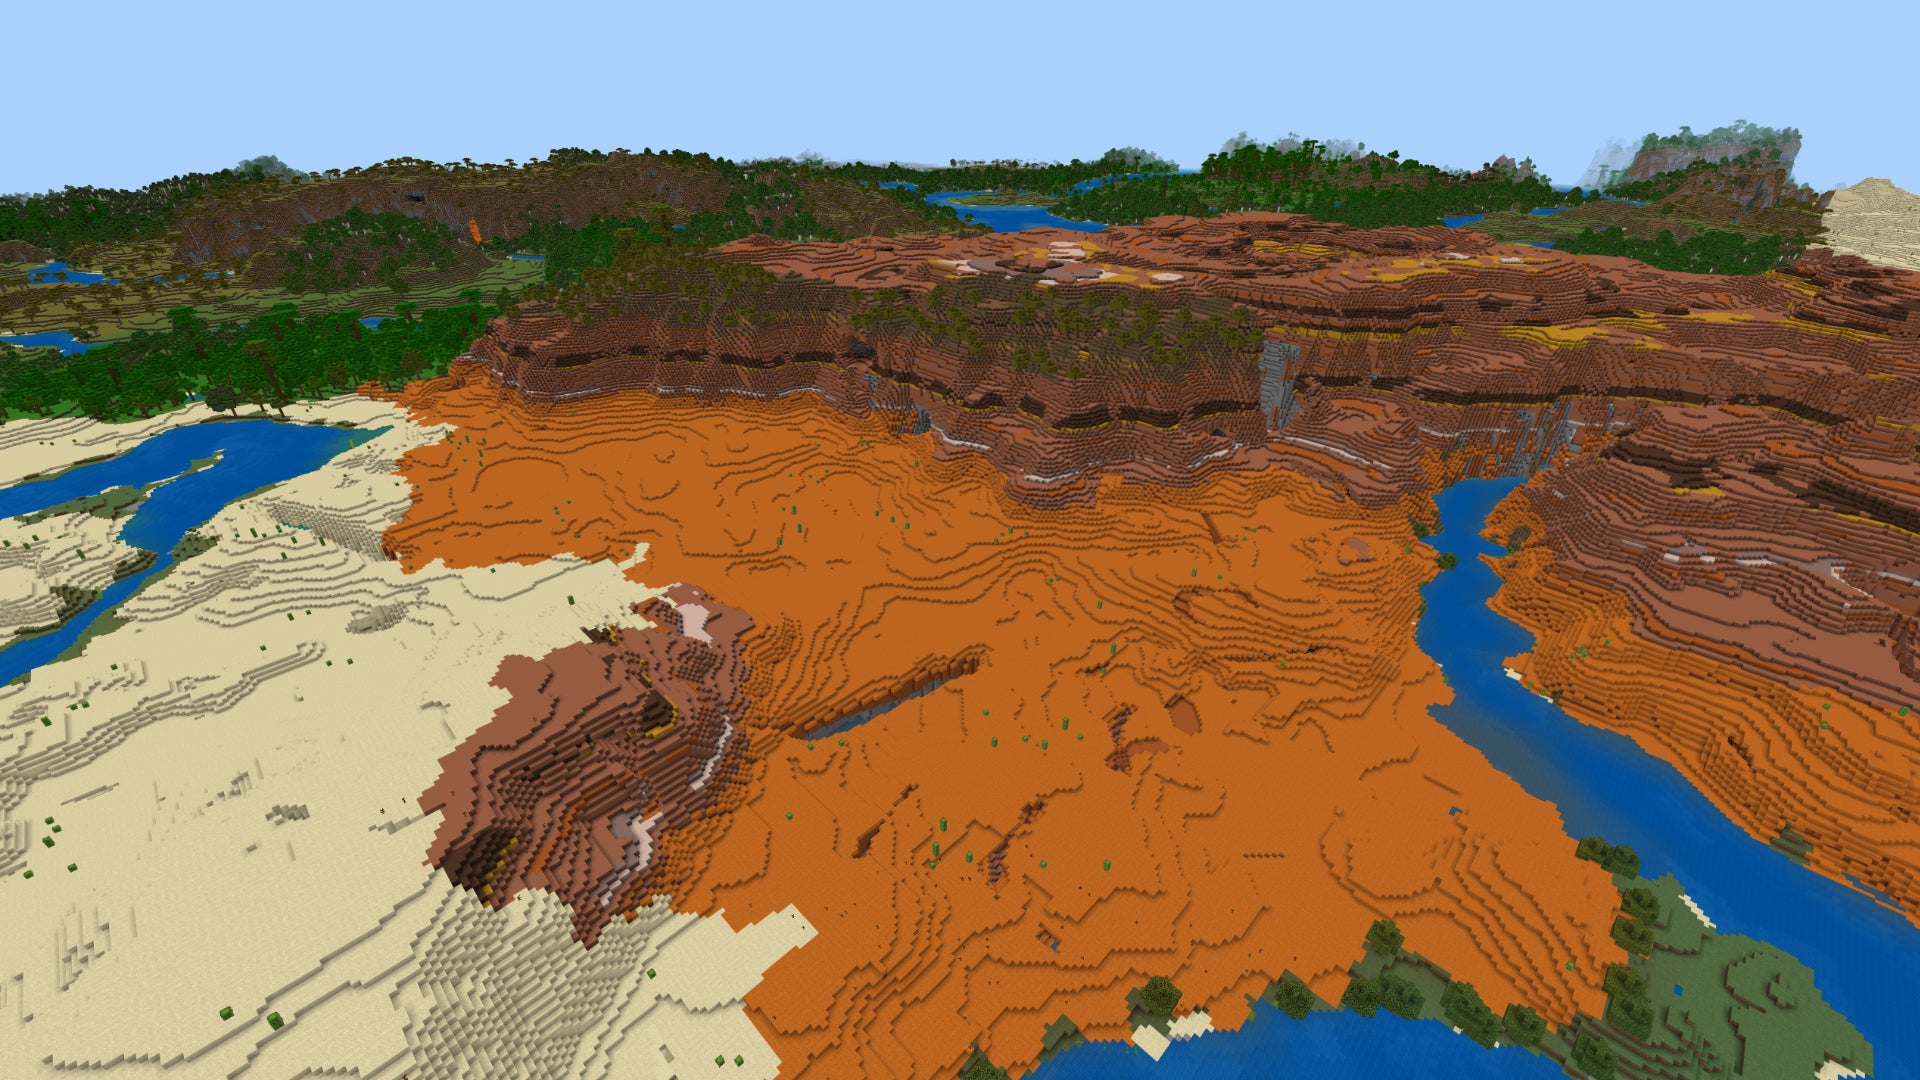 A top down view of a Badlands biome in Minecraft Bedrock, with the entrance to a ravine in the foreground below.